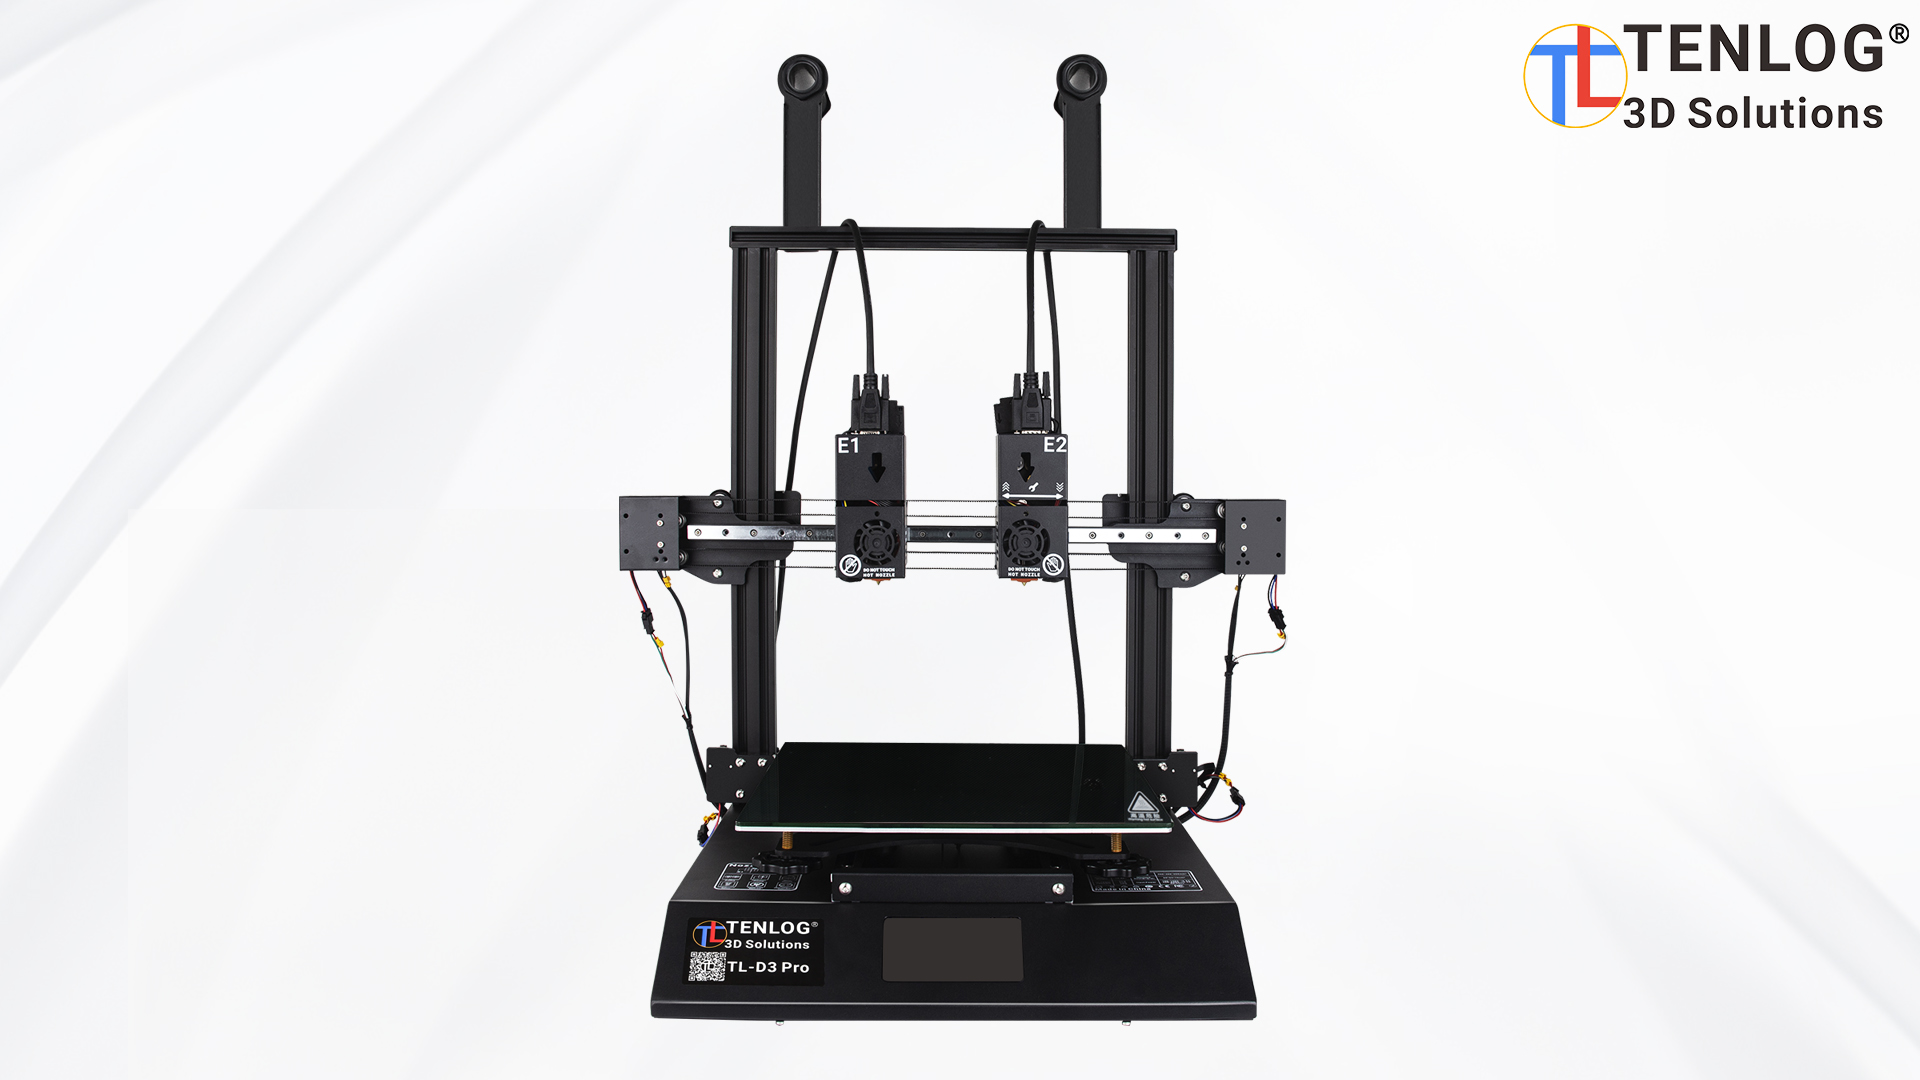 Tenlog IDEX 3D Printer is on Sale at Discount Price  (This Promotion Has Ended)